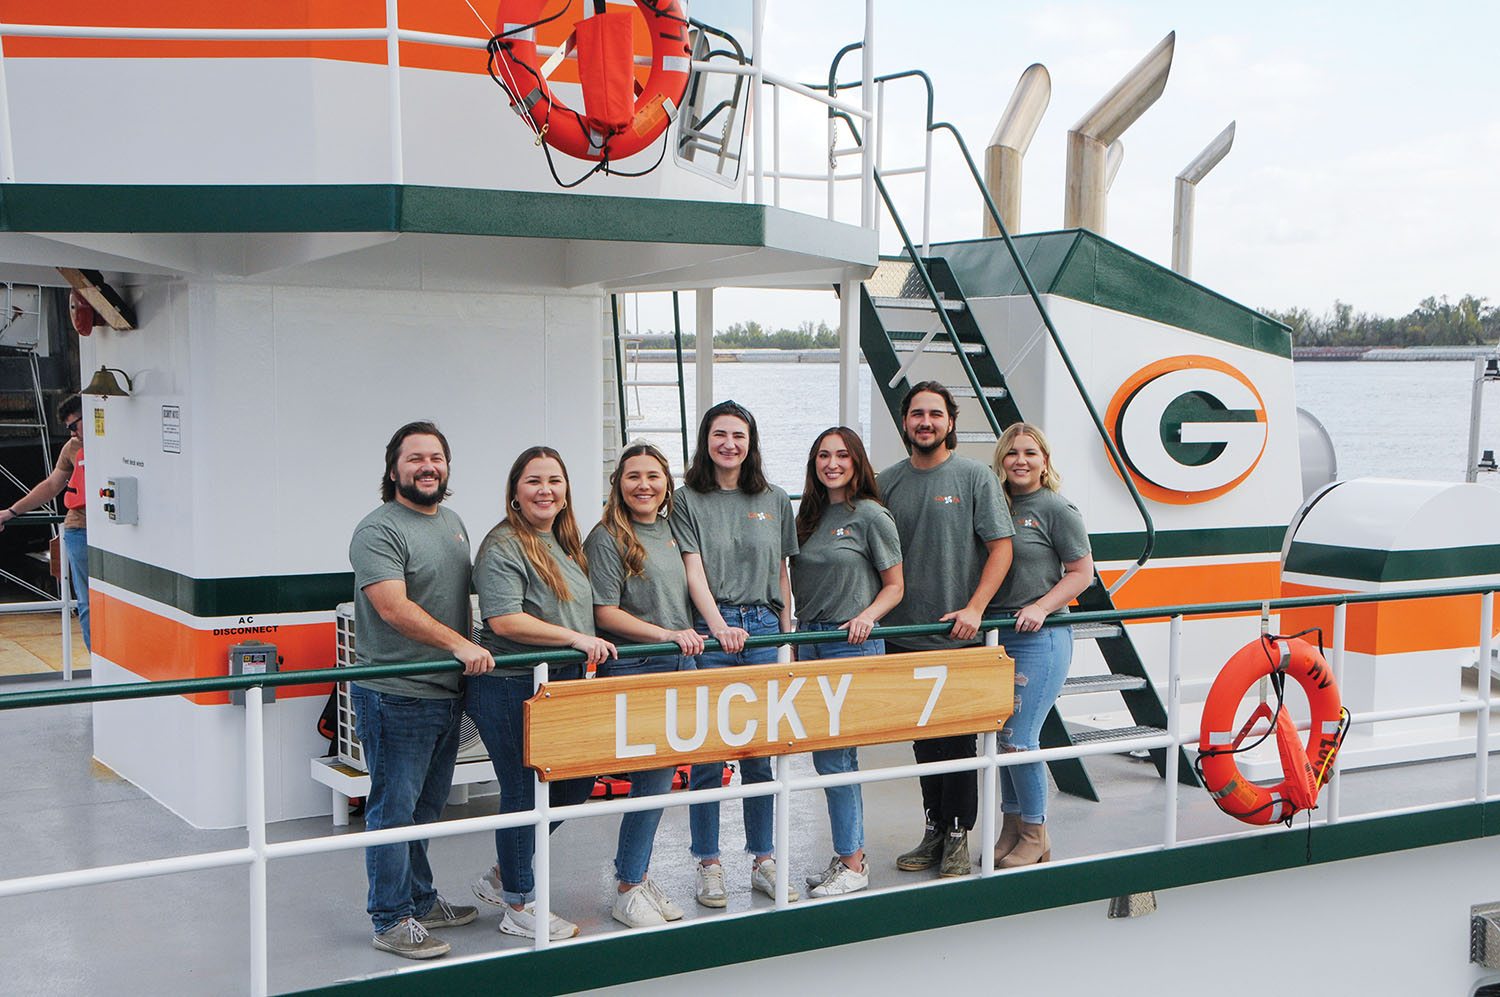 Dan Wise’s seven grandchildren aboard the mv. Lucky 7, from left: Taylor Hymel, Katie Hymel, Emily Hymel, Gracie Wise, Maggie Wise, Noah Hymel and Quincy Hymel. (Photo courtesy of Gnots Reserve)